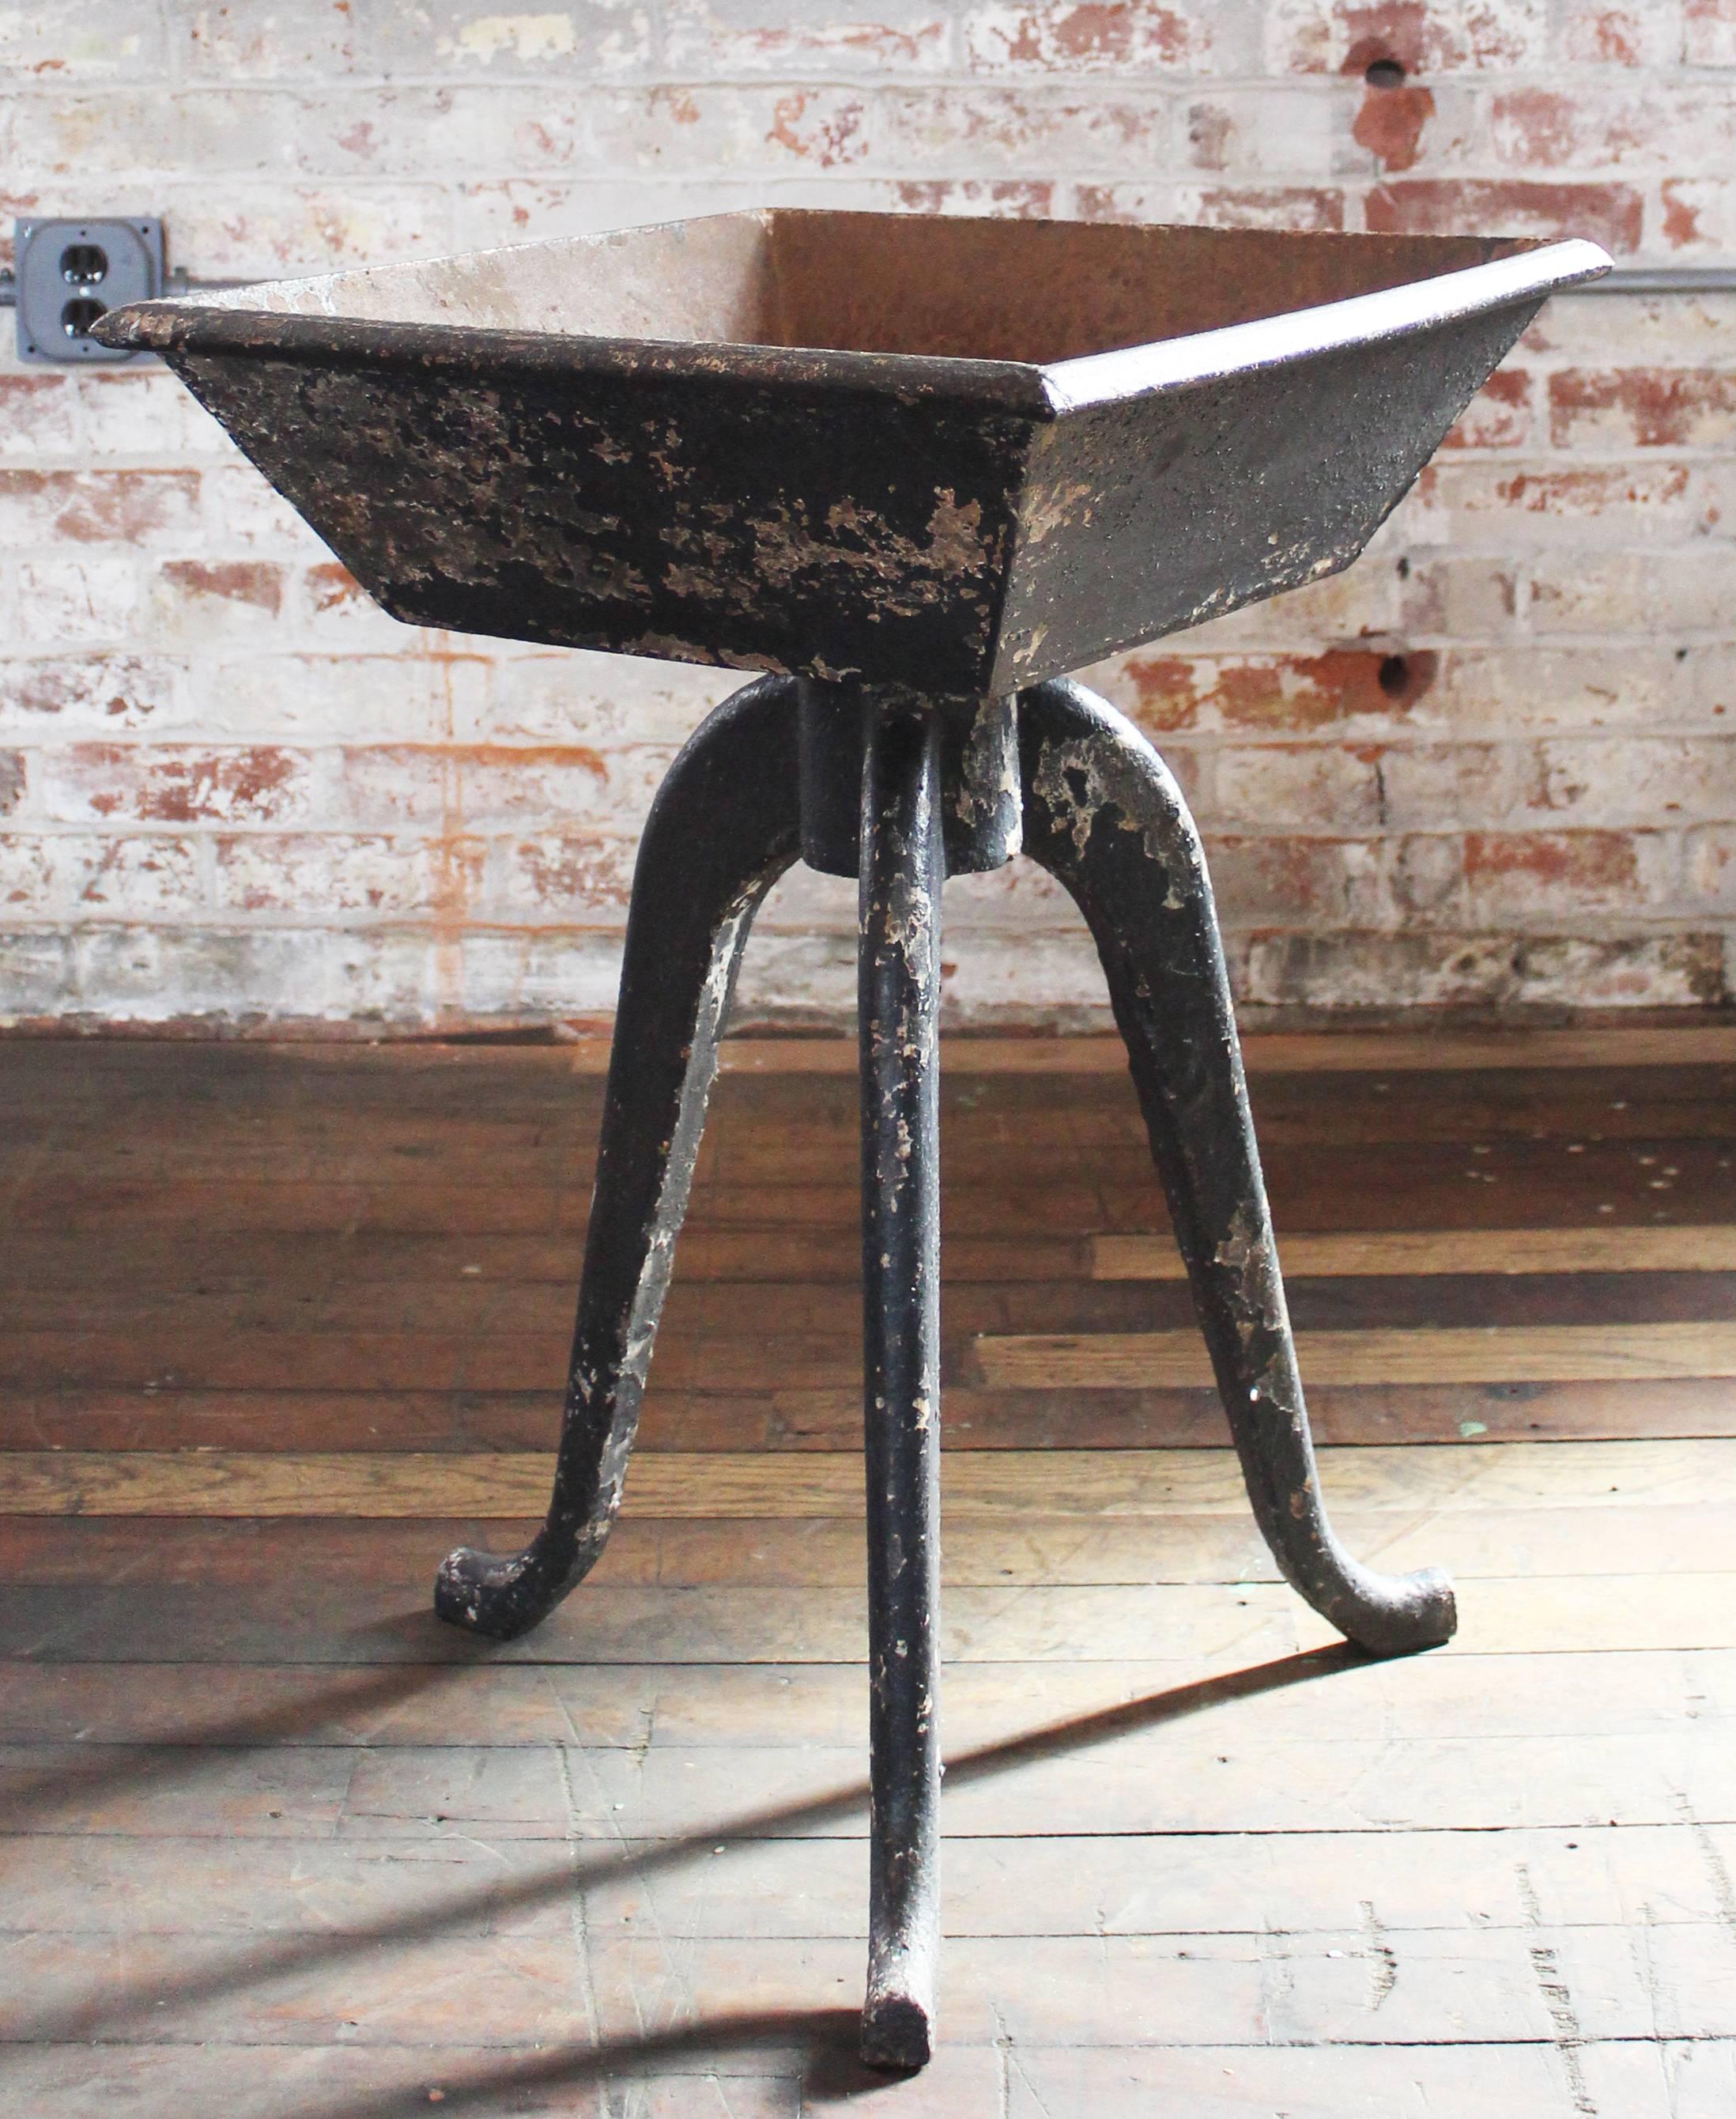 Incredible cast iron vintage industrial rustic planter table stand art! Use this outside as a planter or object of art, inside as a table, stand, dimensions are 18 3/4" x 19" x 26 1/2" in height. Top measures 5 1/2" in height,